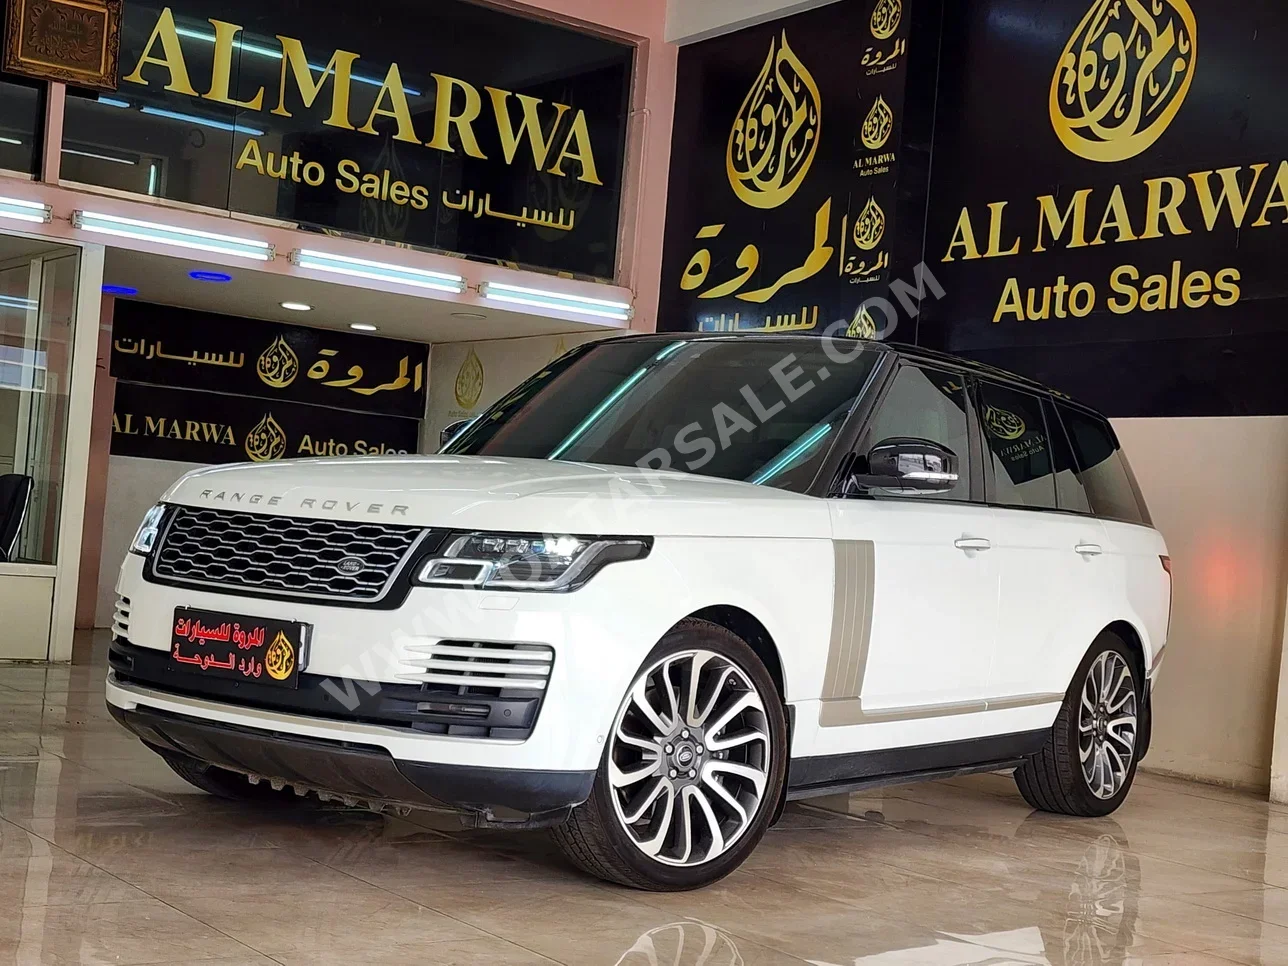  Land Rover  Range Rover  Vogue SE Super charged  2019  Automatic  25,000 Km  8 Cylinder  Four Wheel Drive (4WD)  SUV  White  With Warranty